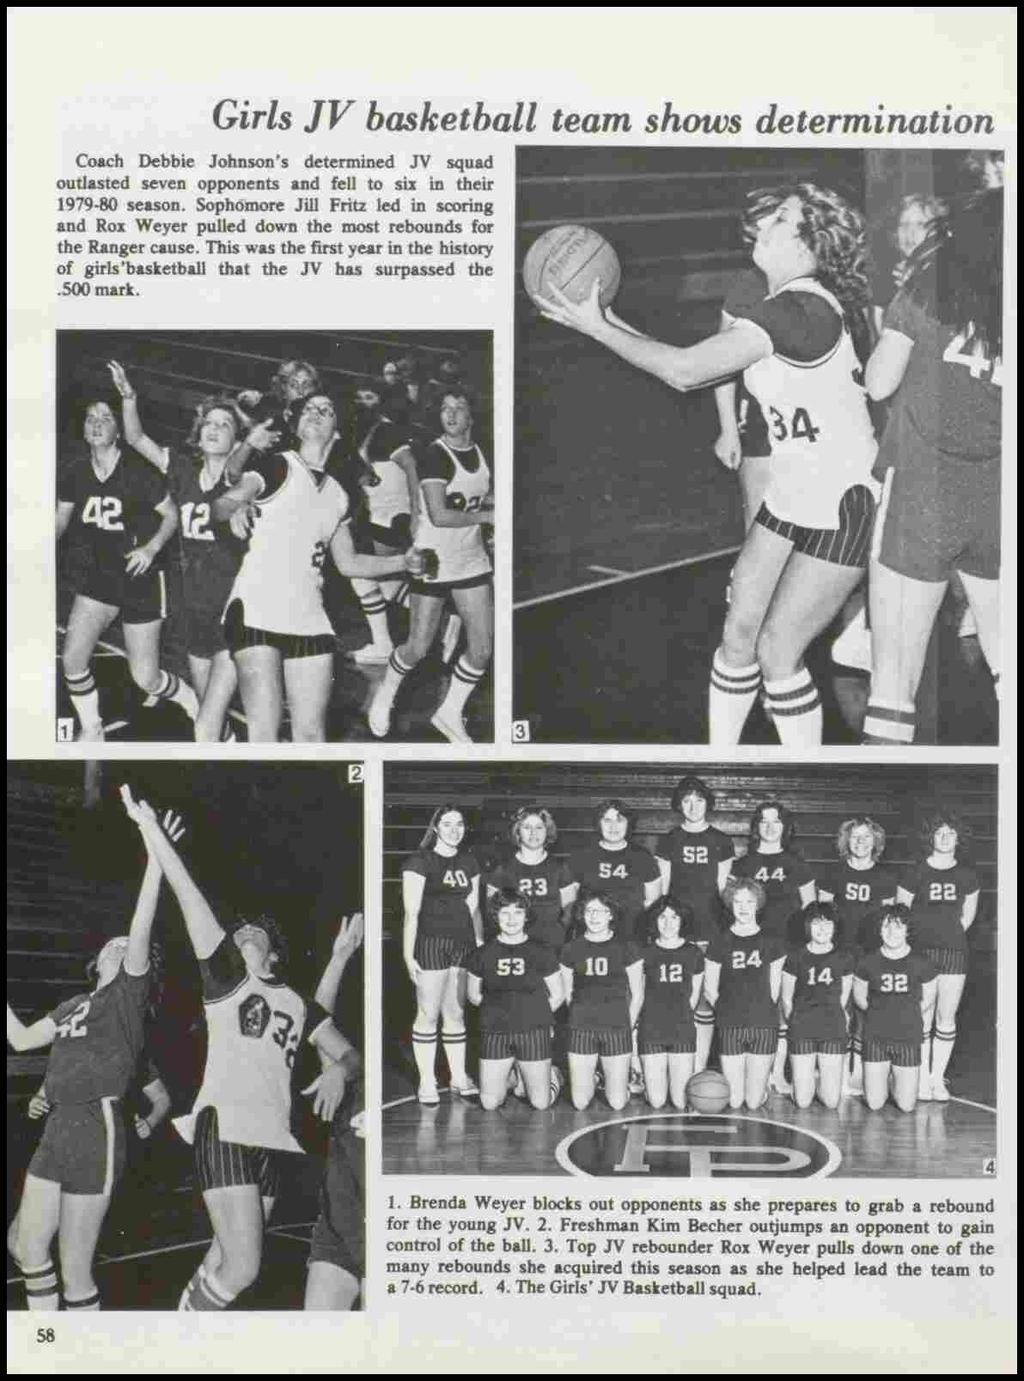 Girls JV basketball team shows determination Coach Debbie Johnson's determined JV squad outlasted seven opponents and fell to six in their 1979-80 season.